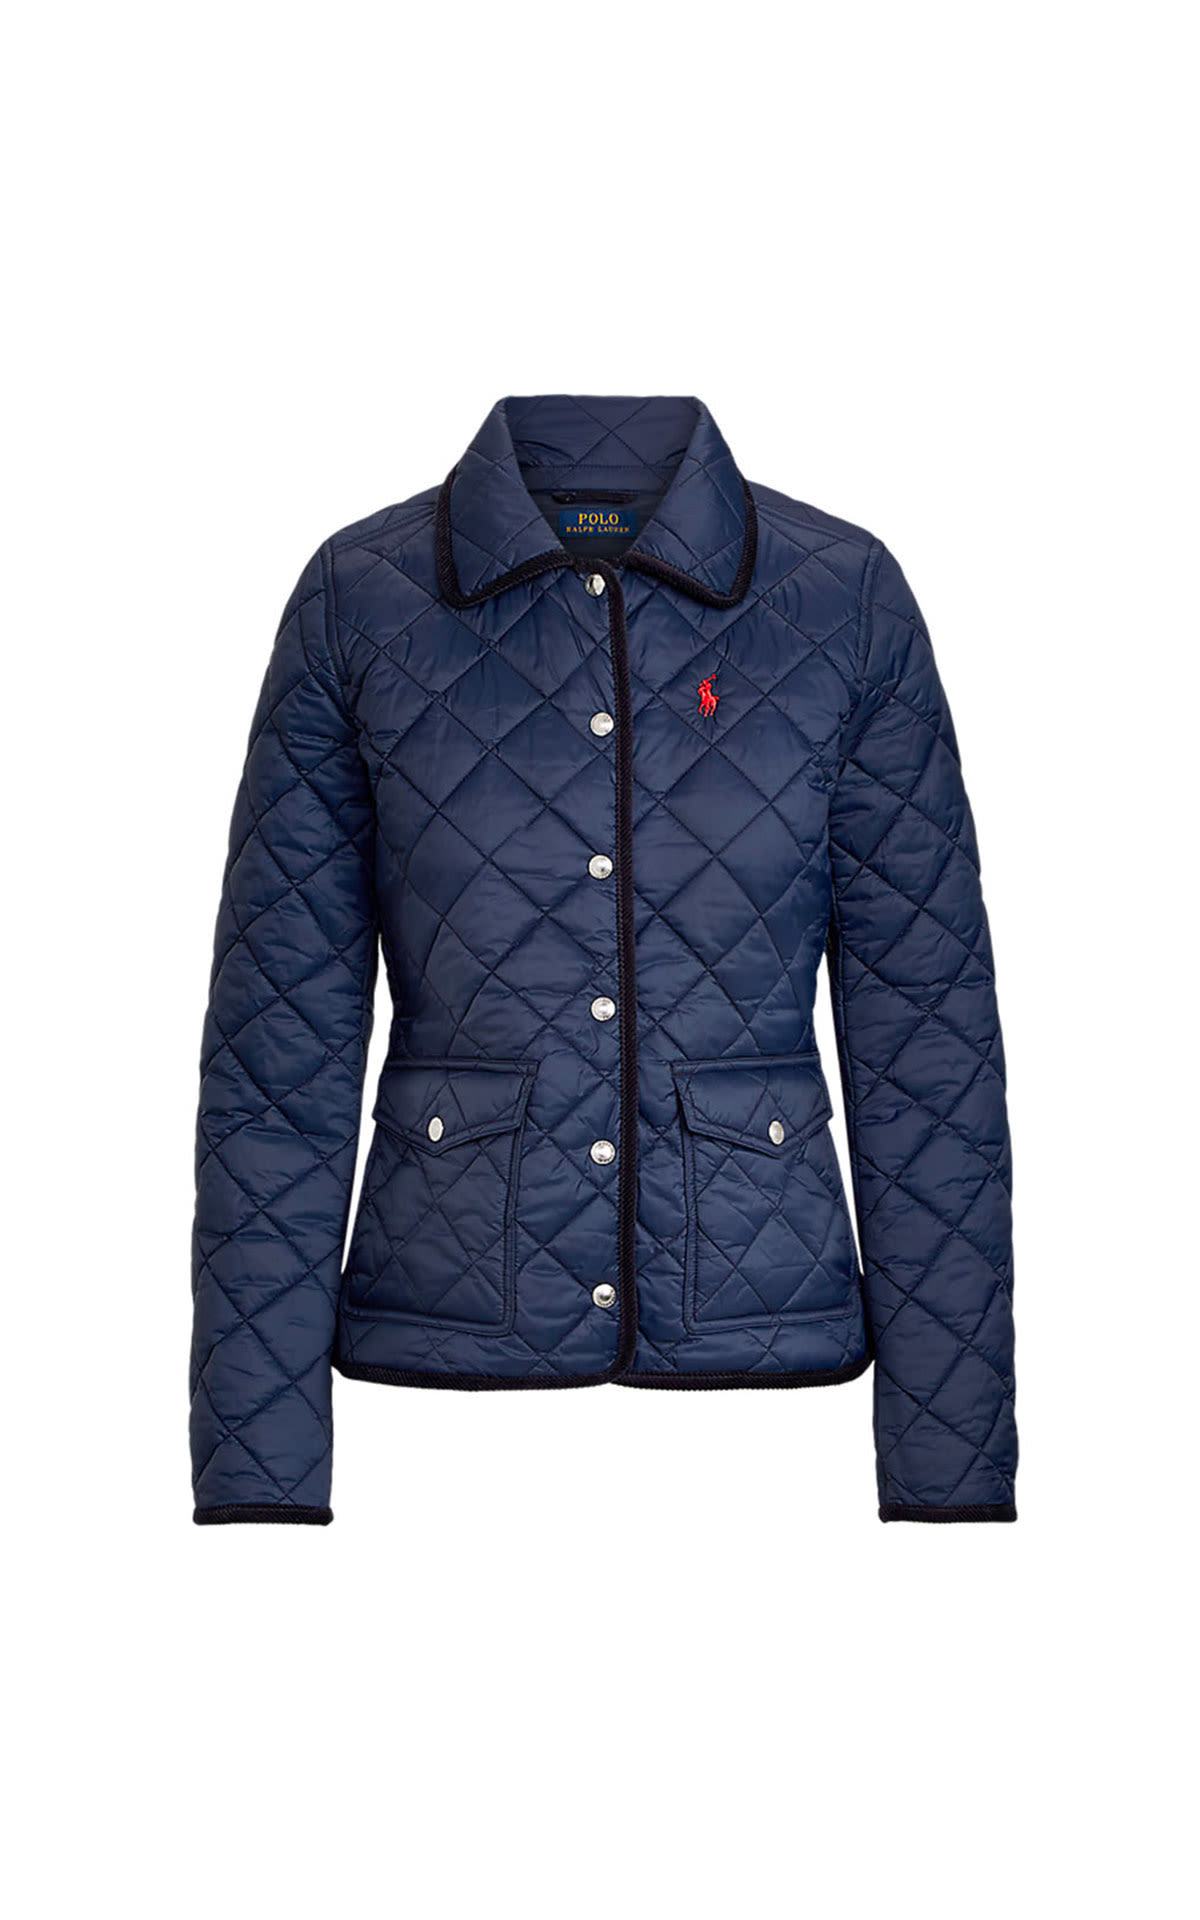  Polo Ralph Lauren Blue quilted jacket